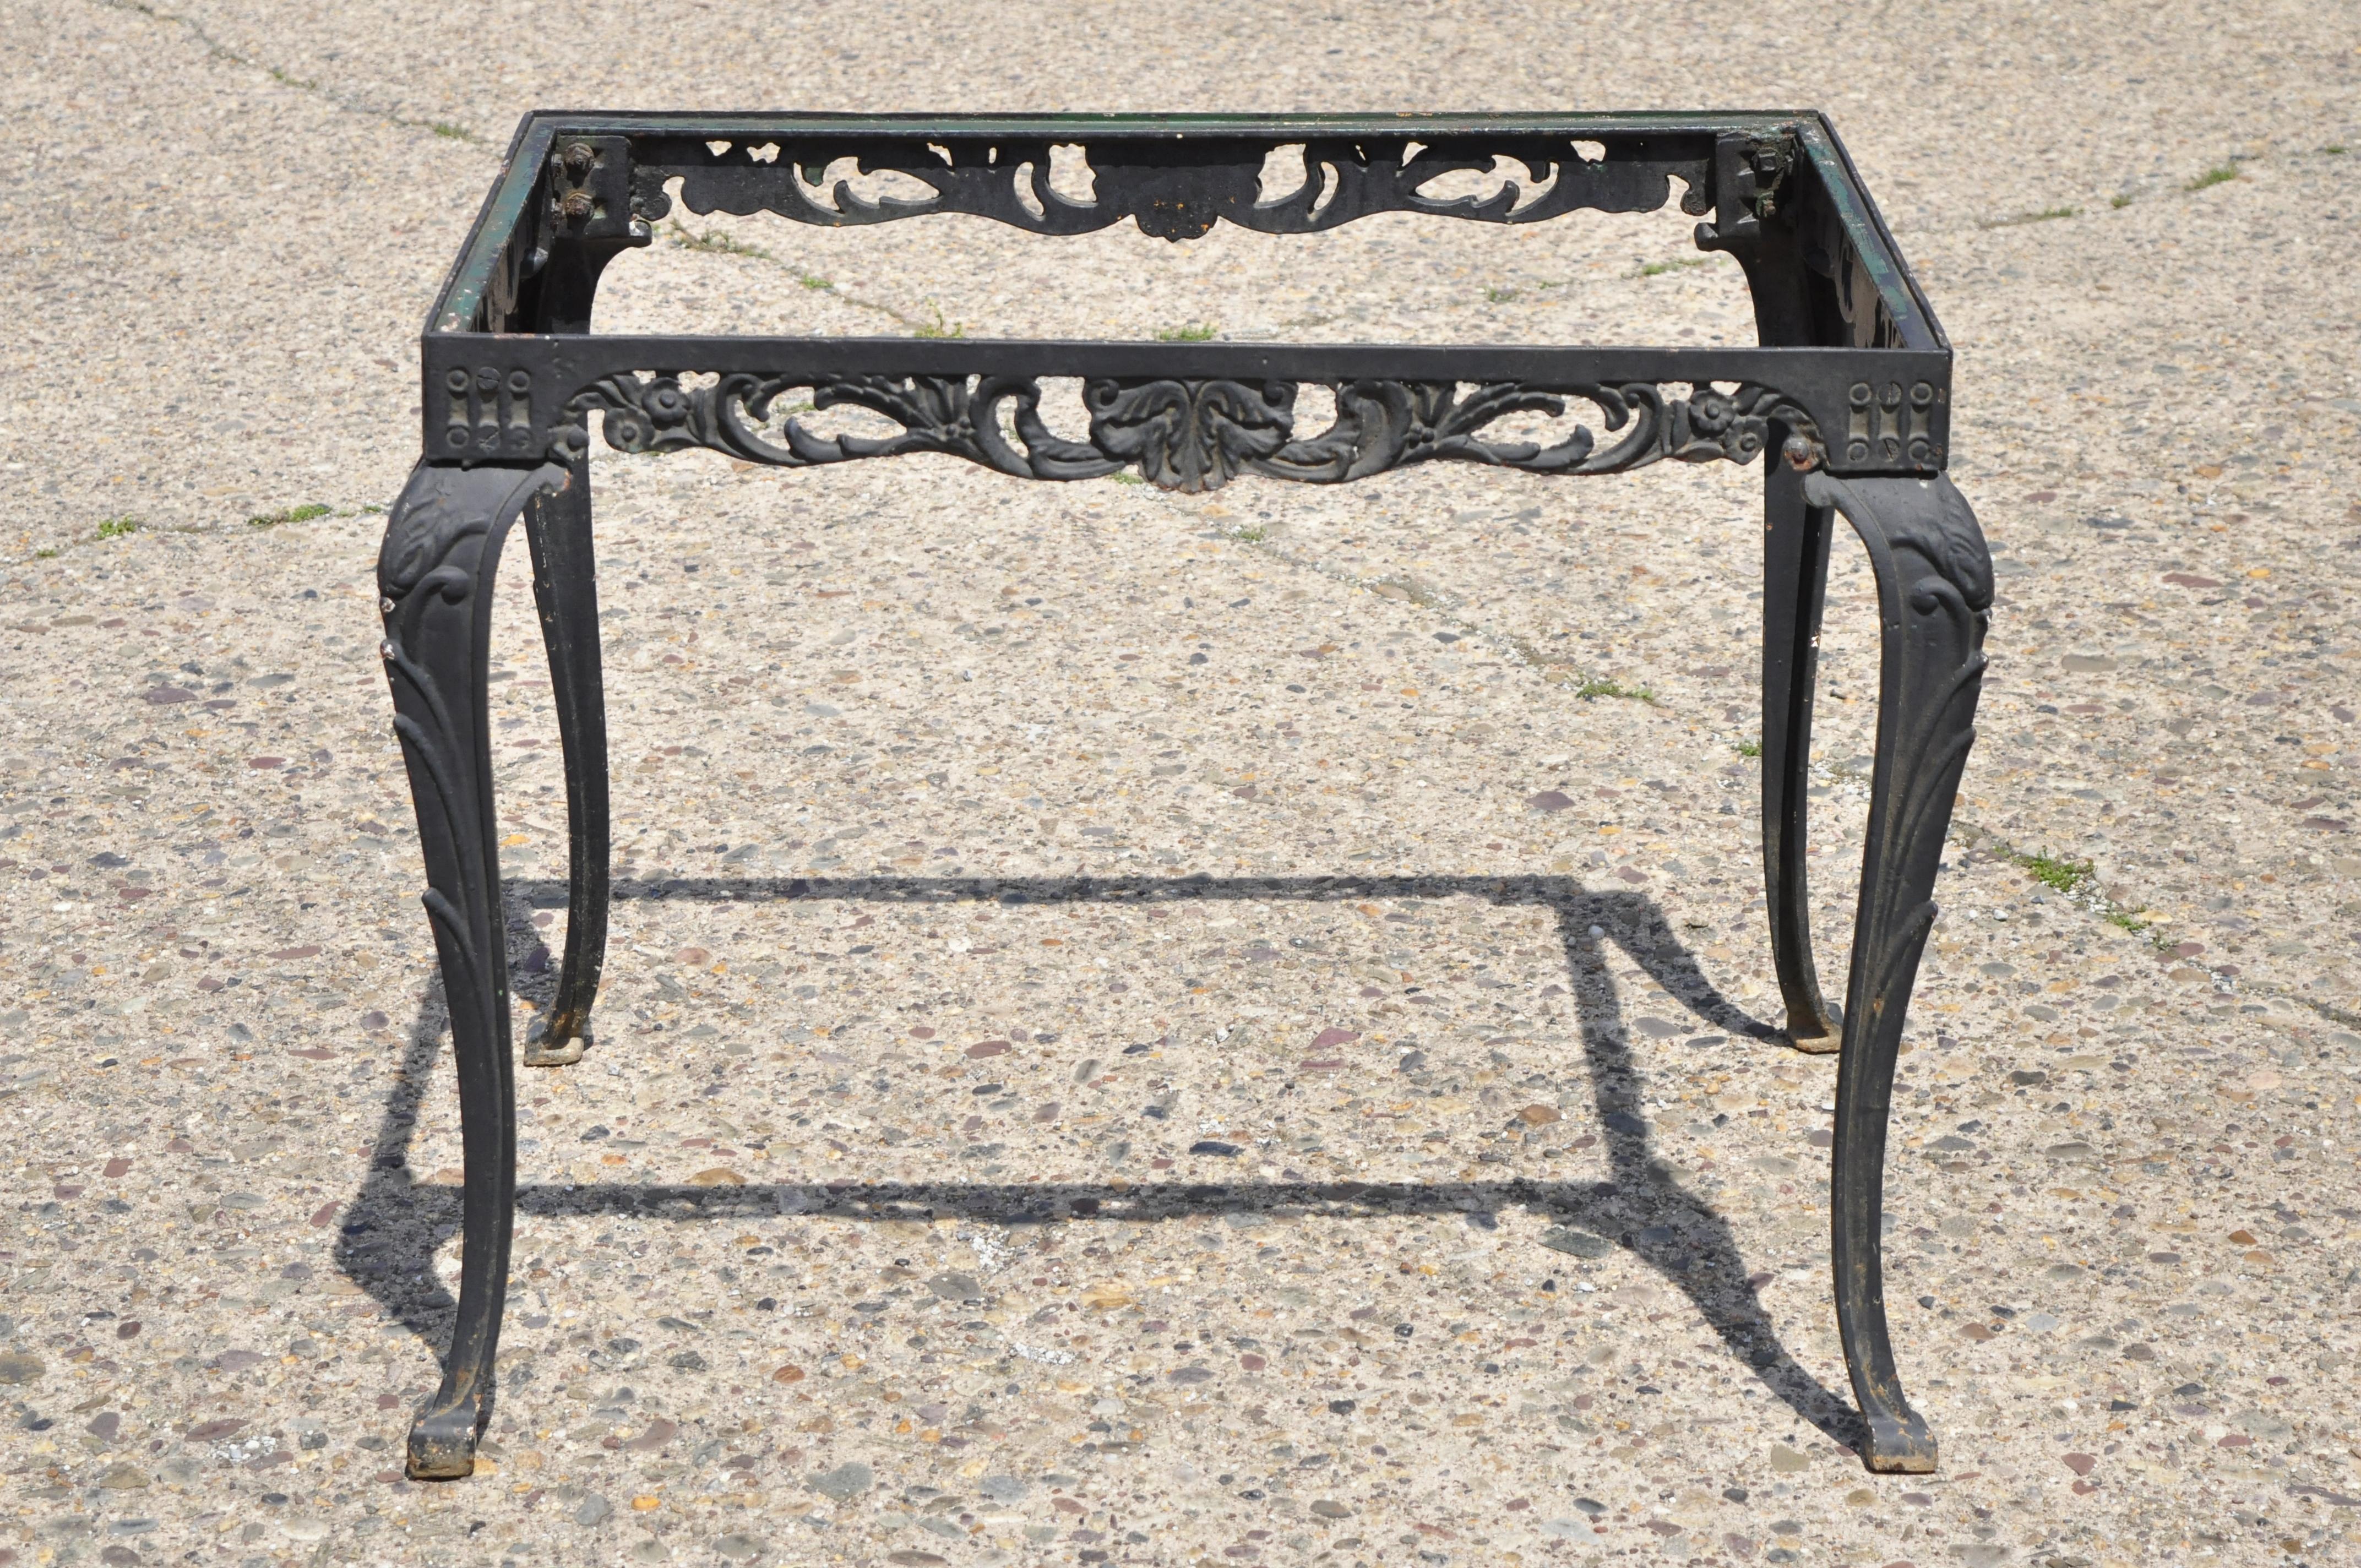 Antique French Victorian cast iron cabriole leg rectangular occasional side table. Item features floral scrollwork pierces skirt, heavy cast iron construction, cabriole legs, quality American craftsmanship, great style and form. No top, Circa early